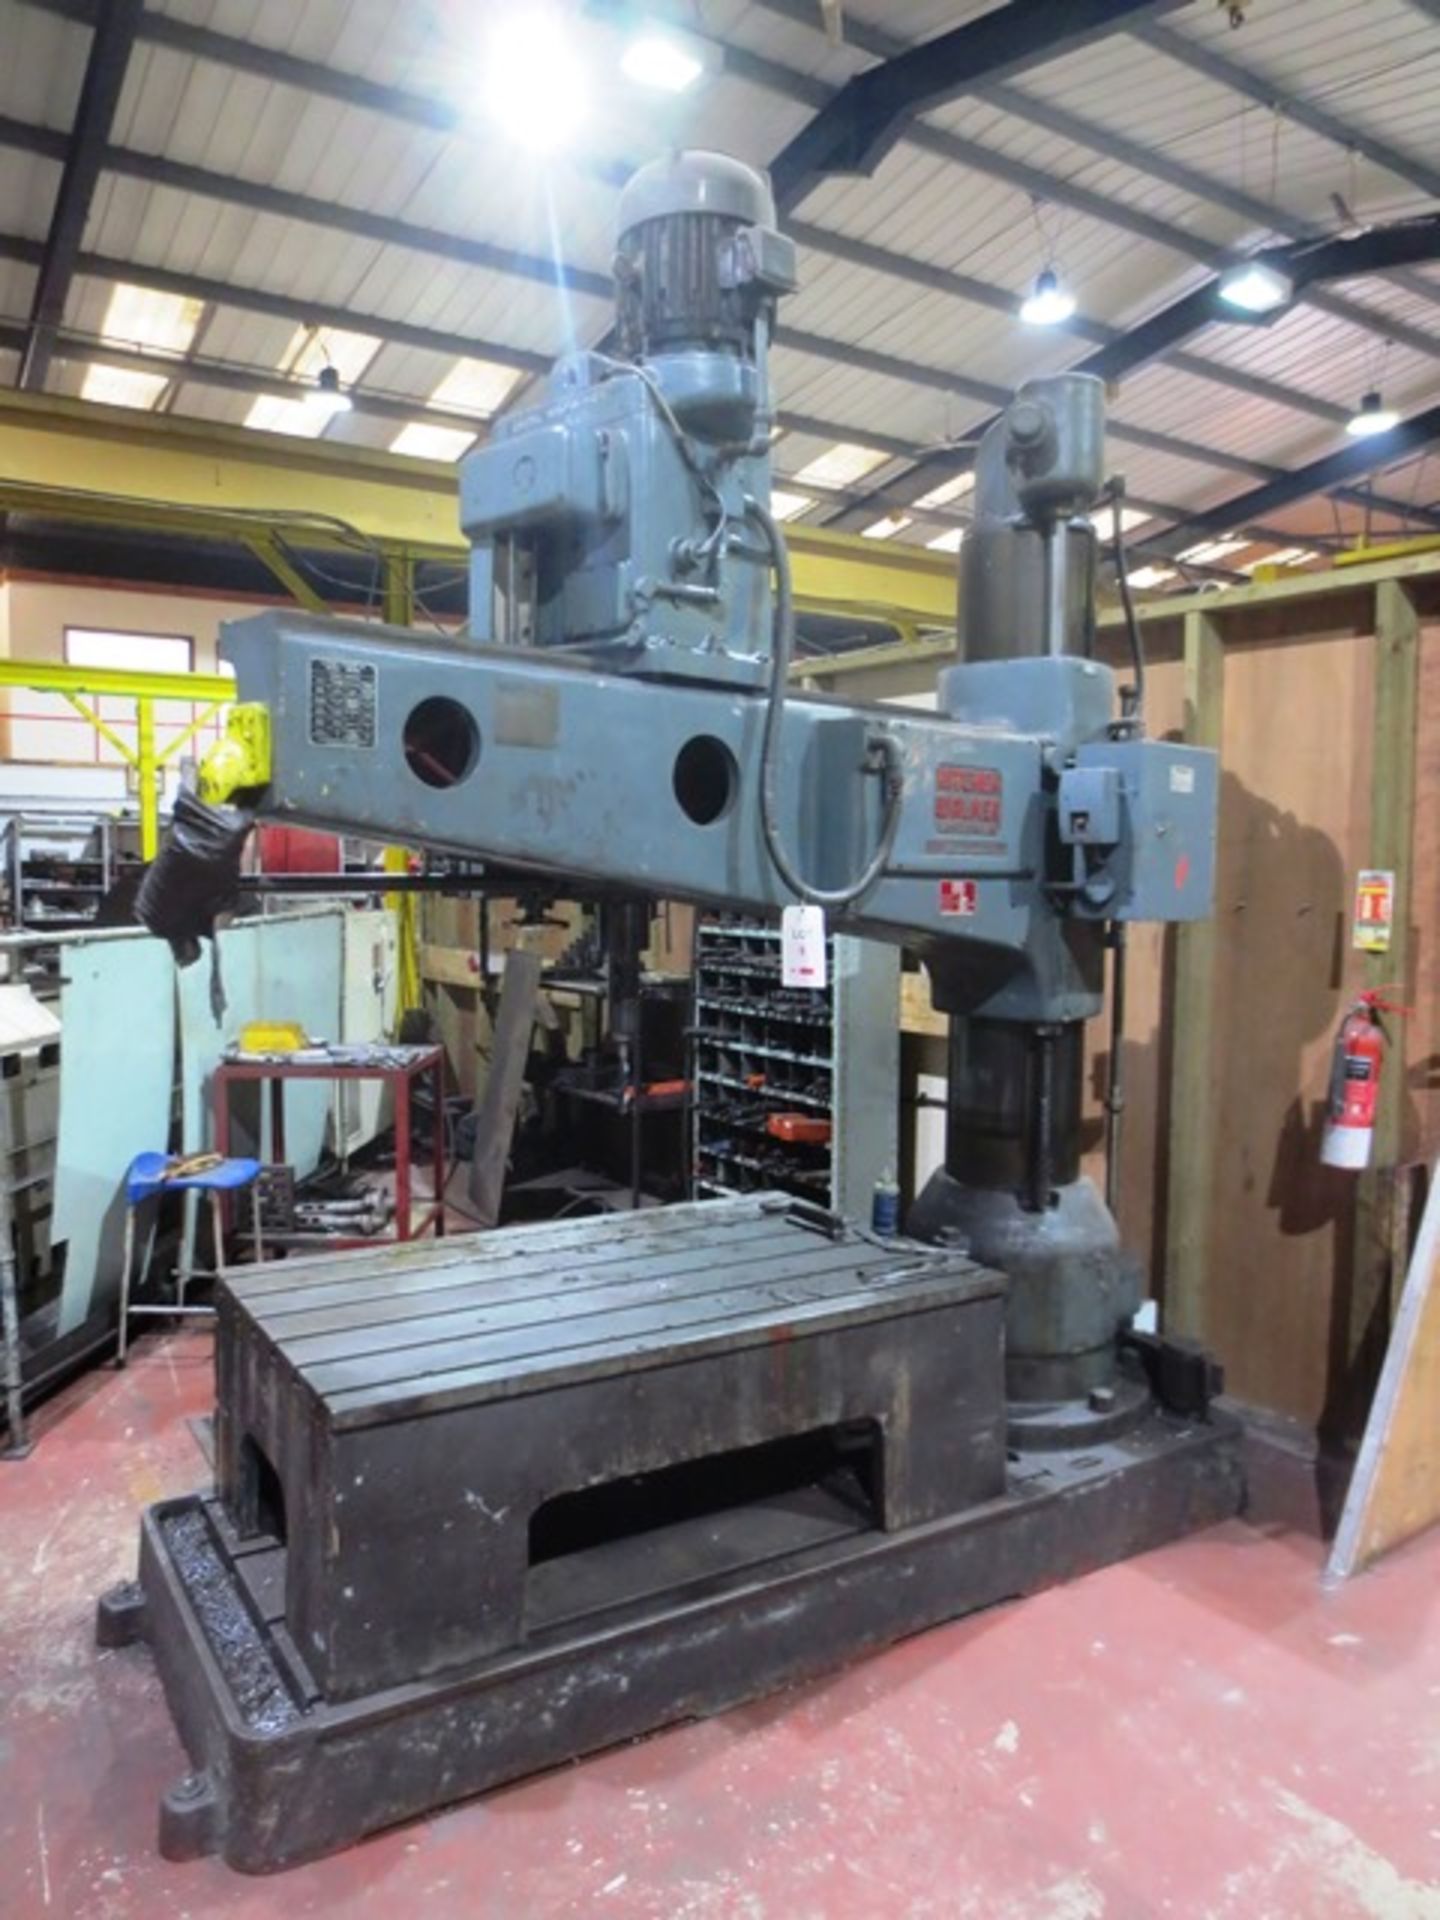 Kitchen Walker E3 6ft elevating column radial arm drill, serial no: 3210 (1979), spindle speeds 12